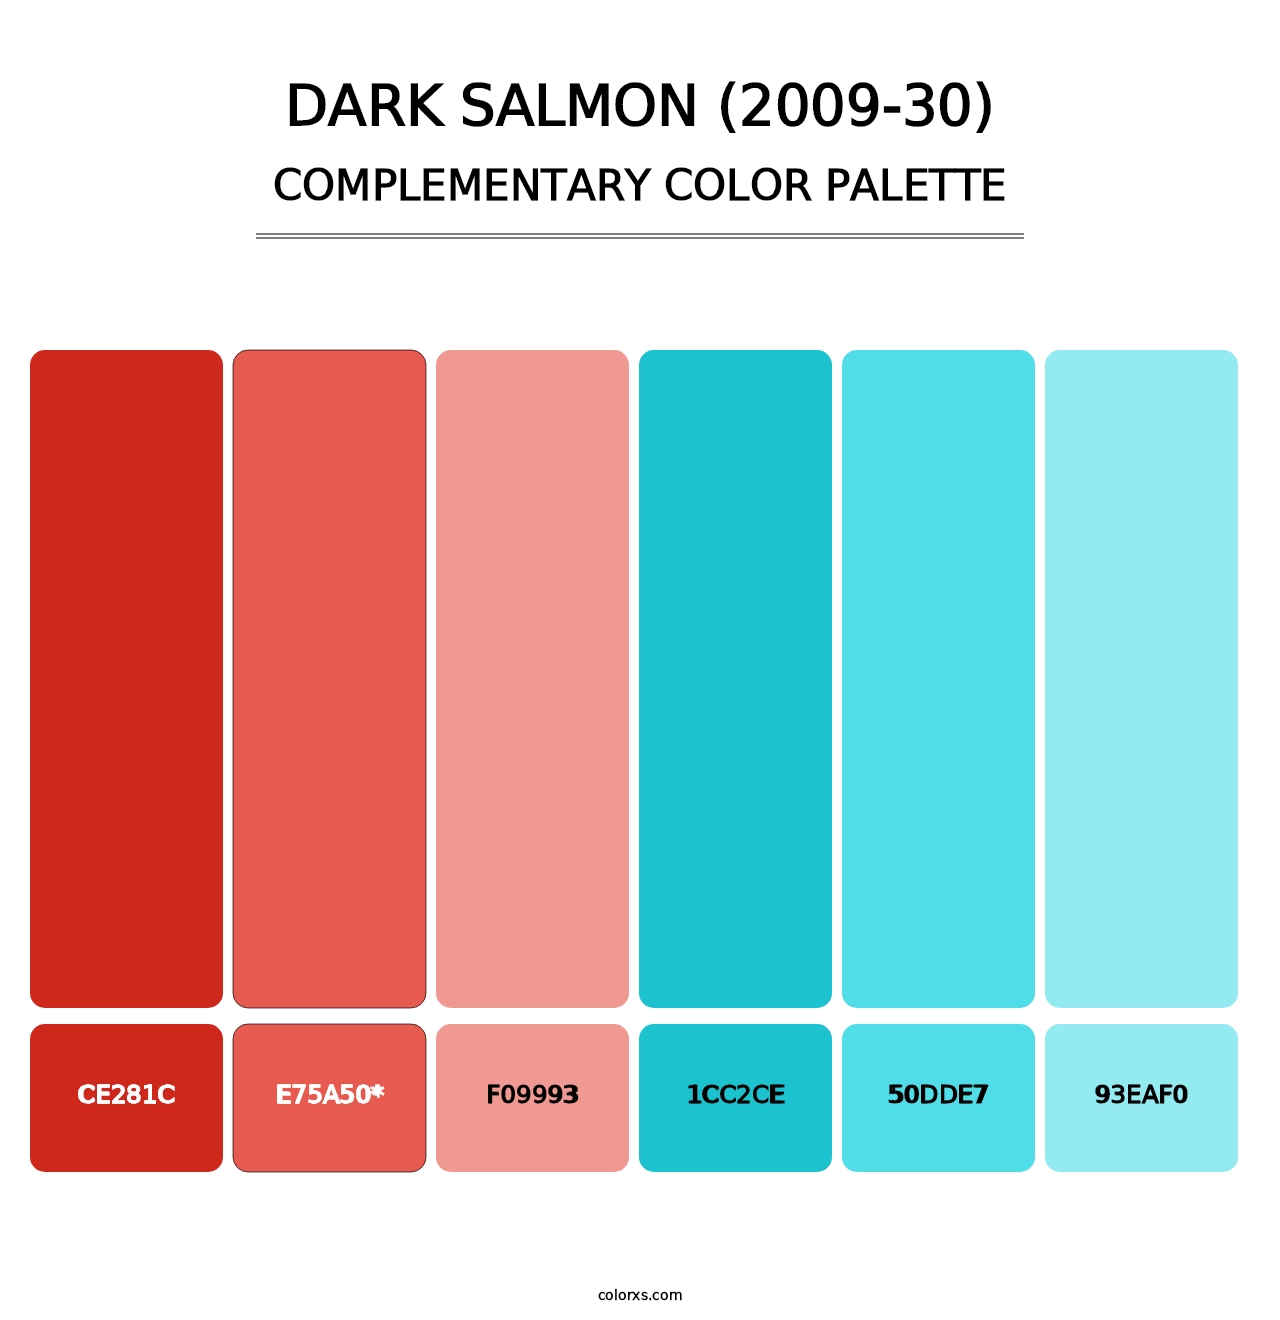 Dark Salmon (2009-30) - Complementary Color Palette